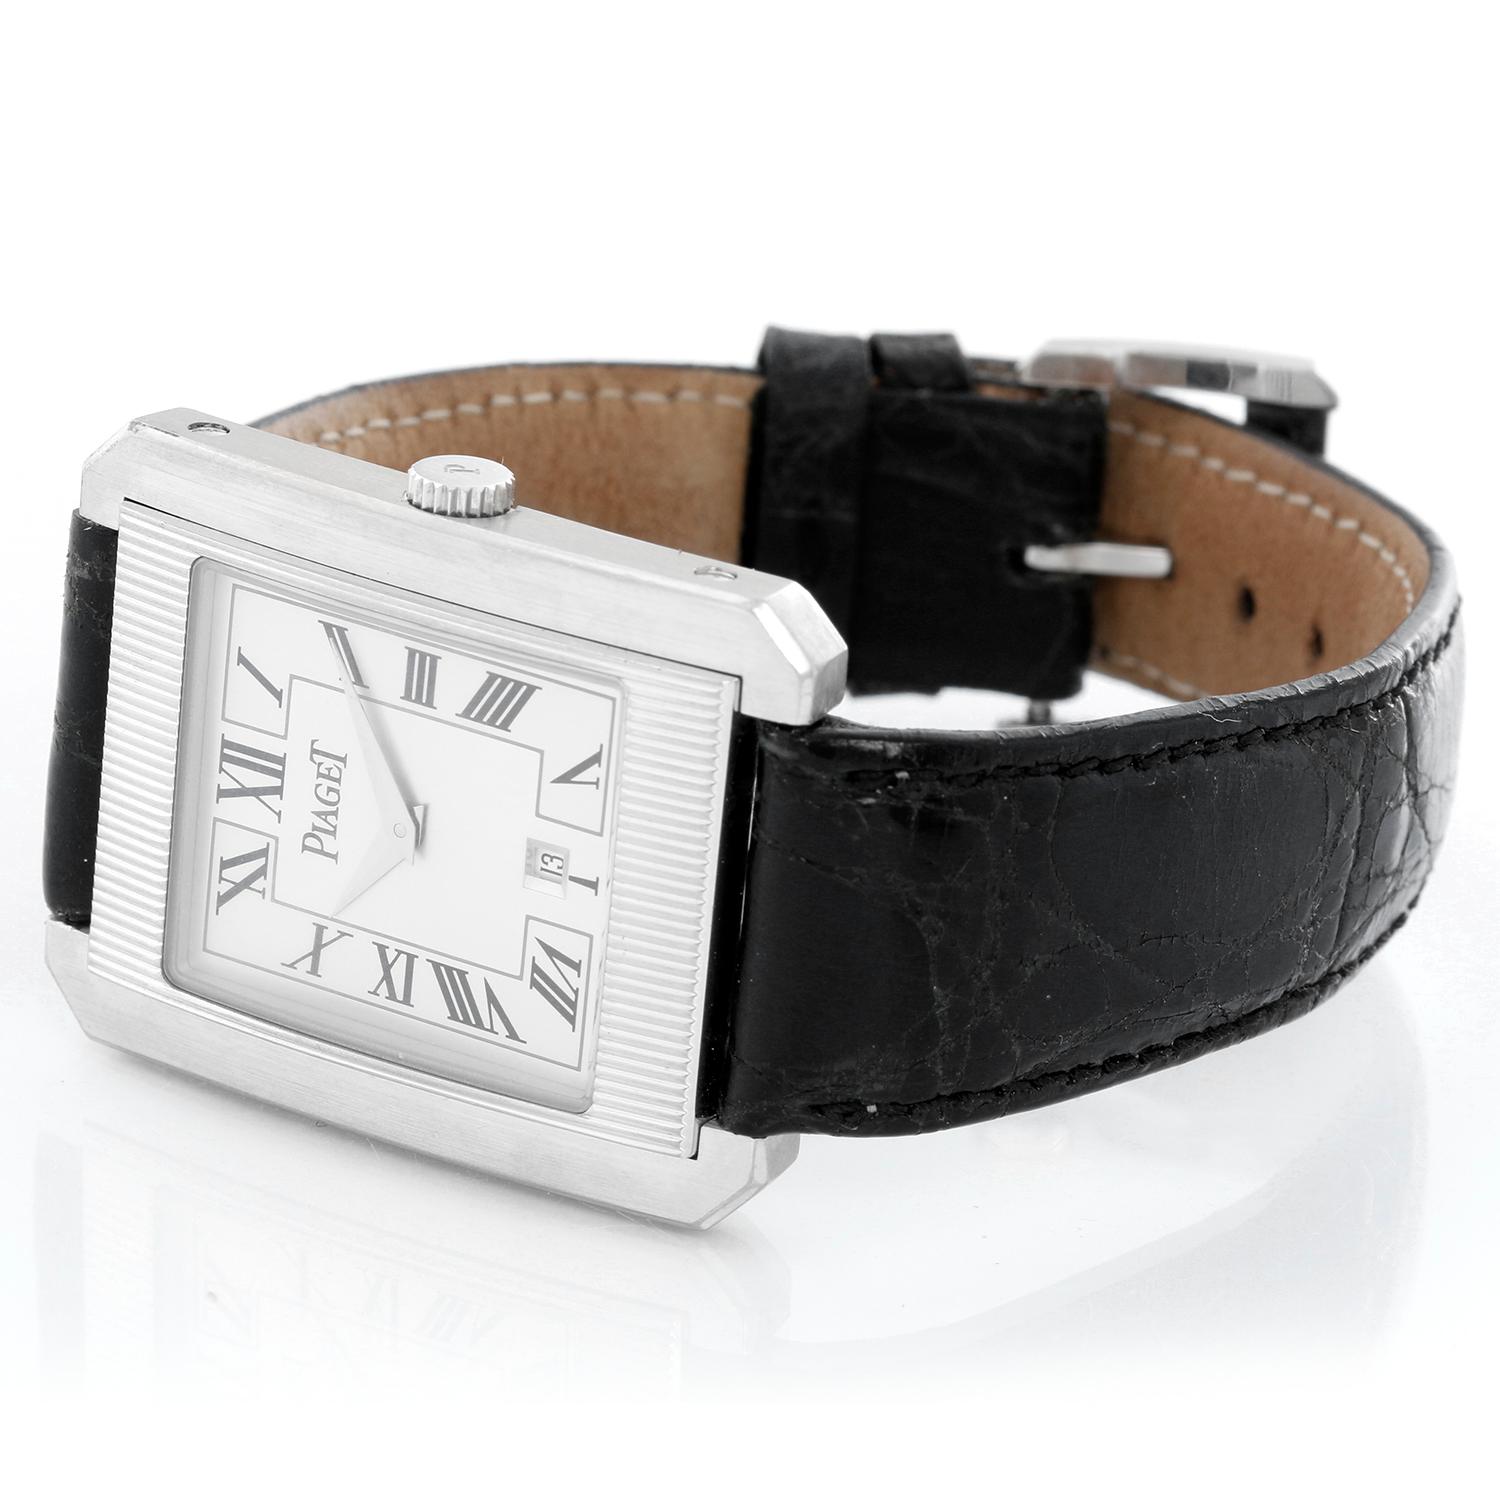 Piaget  18K White Gold Protocole Men's Watch Ref. 26200 - Quartz. 18K White gold case ( 31 x 40 mm); sticker on caseback intact. Silver dial with black Roman numerals; date at 6 o'clock. Black alligator strap with 18K white gold Piaget buckle.